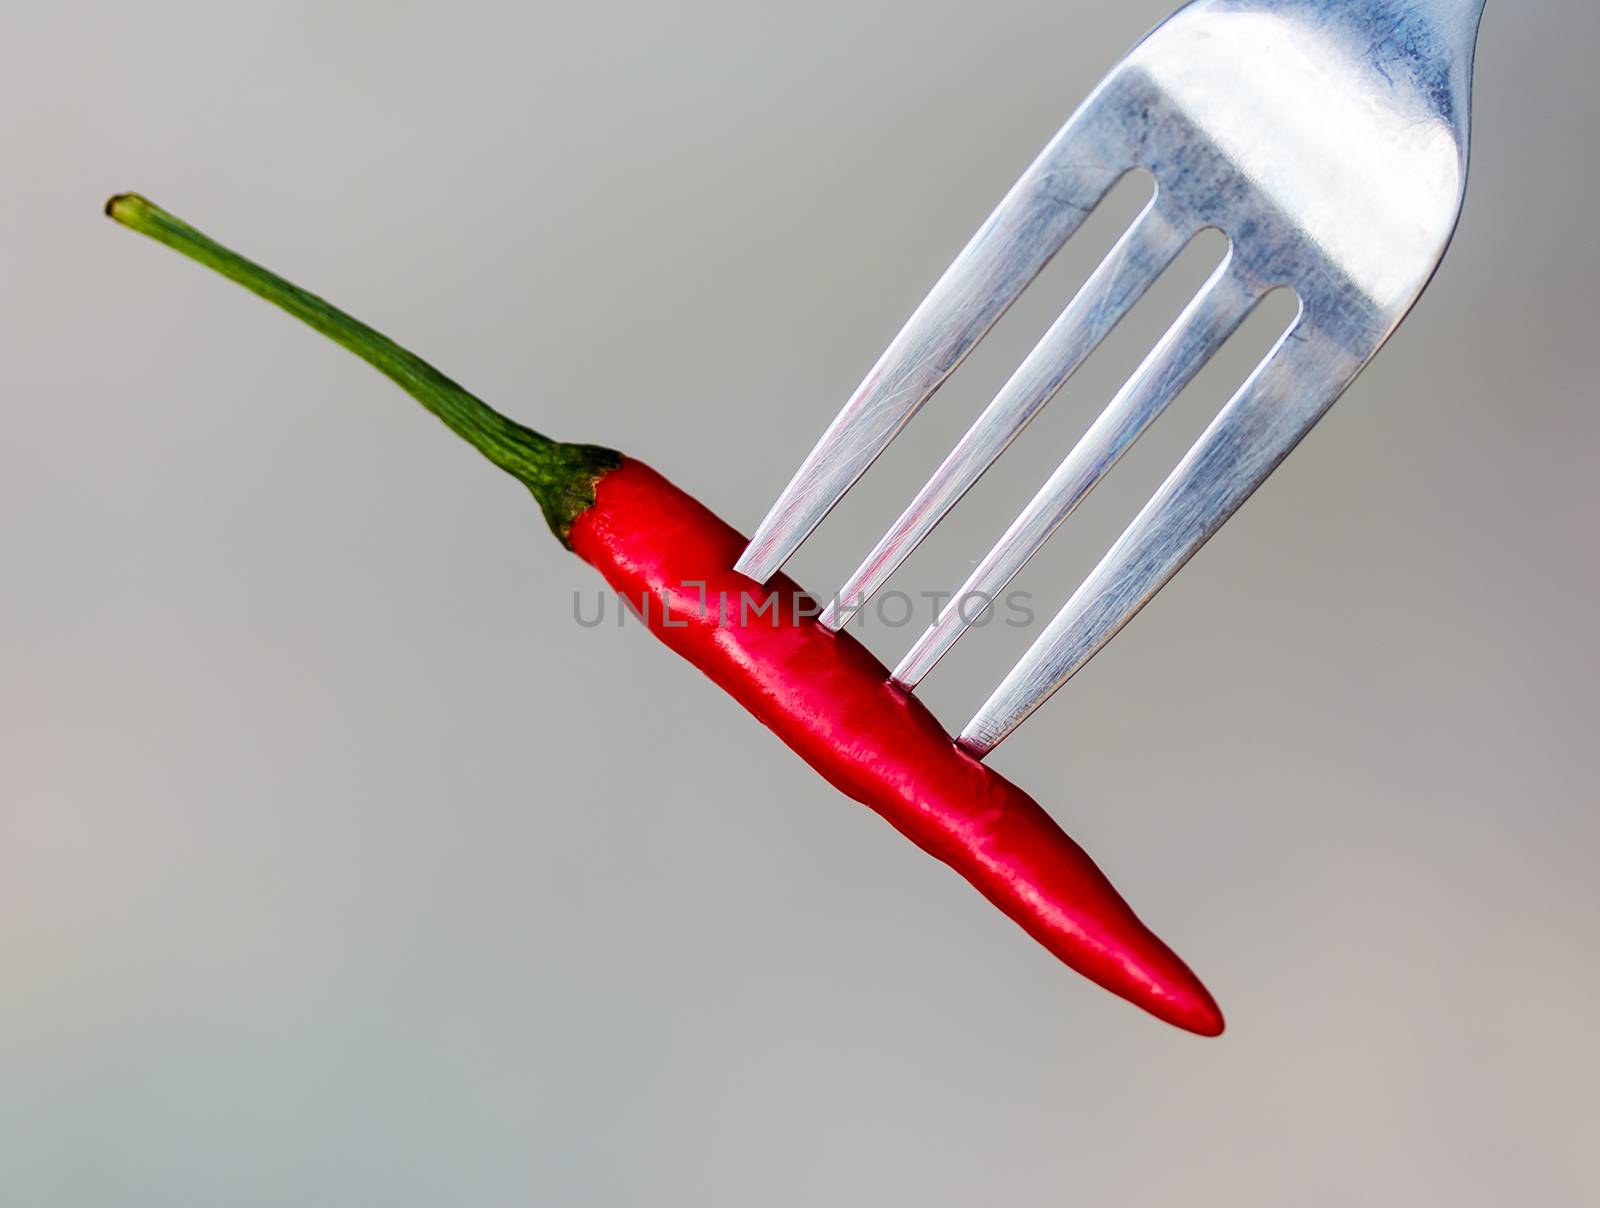 Chilli On Fork Meaning Red Pepper And Peppers